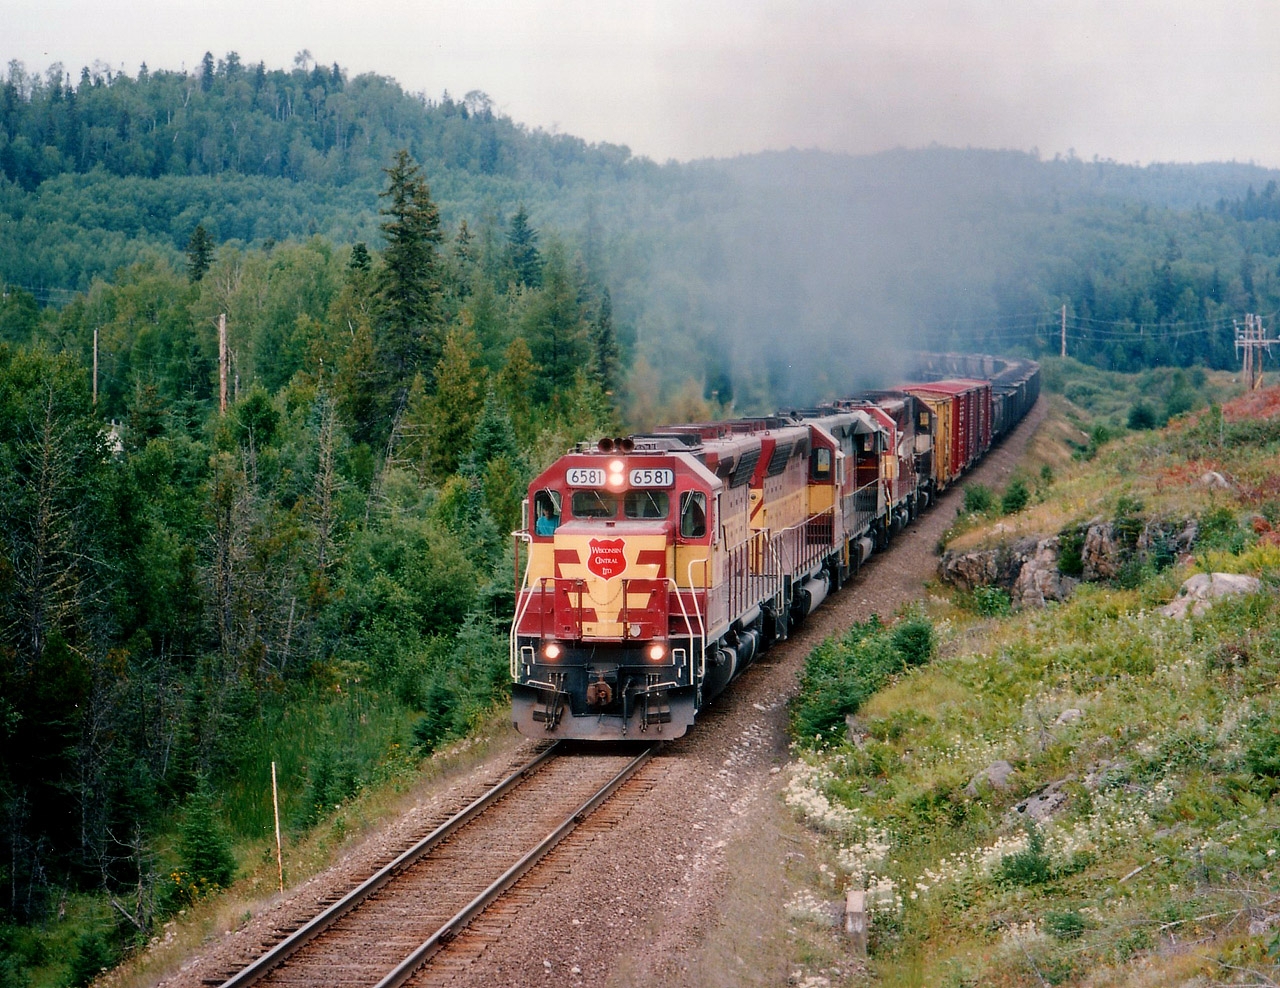 The daily #10 roars out of Hawk Junction on its late afternoon departure for Sault Ste. Marie. Five units on the head end for the climb. WC 6581, 6522, 6006, 6583 and 589. The 6006 is still in AC paint with its AC number, but WC heralds on the ends. Last unit 589 is a relatively scarce EMD SDL39, it is still active, but now down in Chile. In this photo it was just mooching a ride.